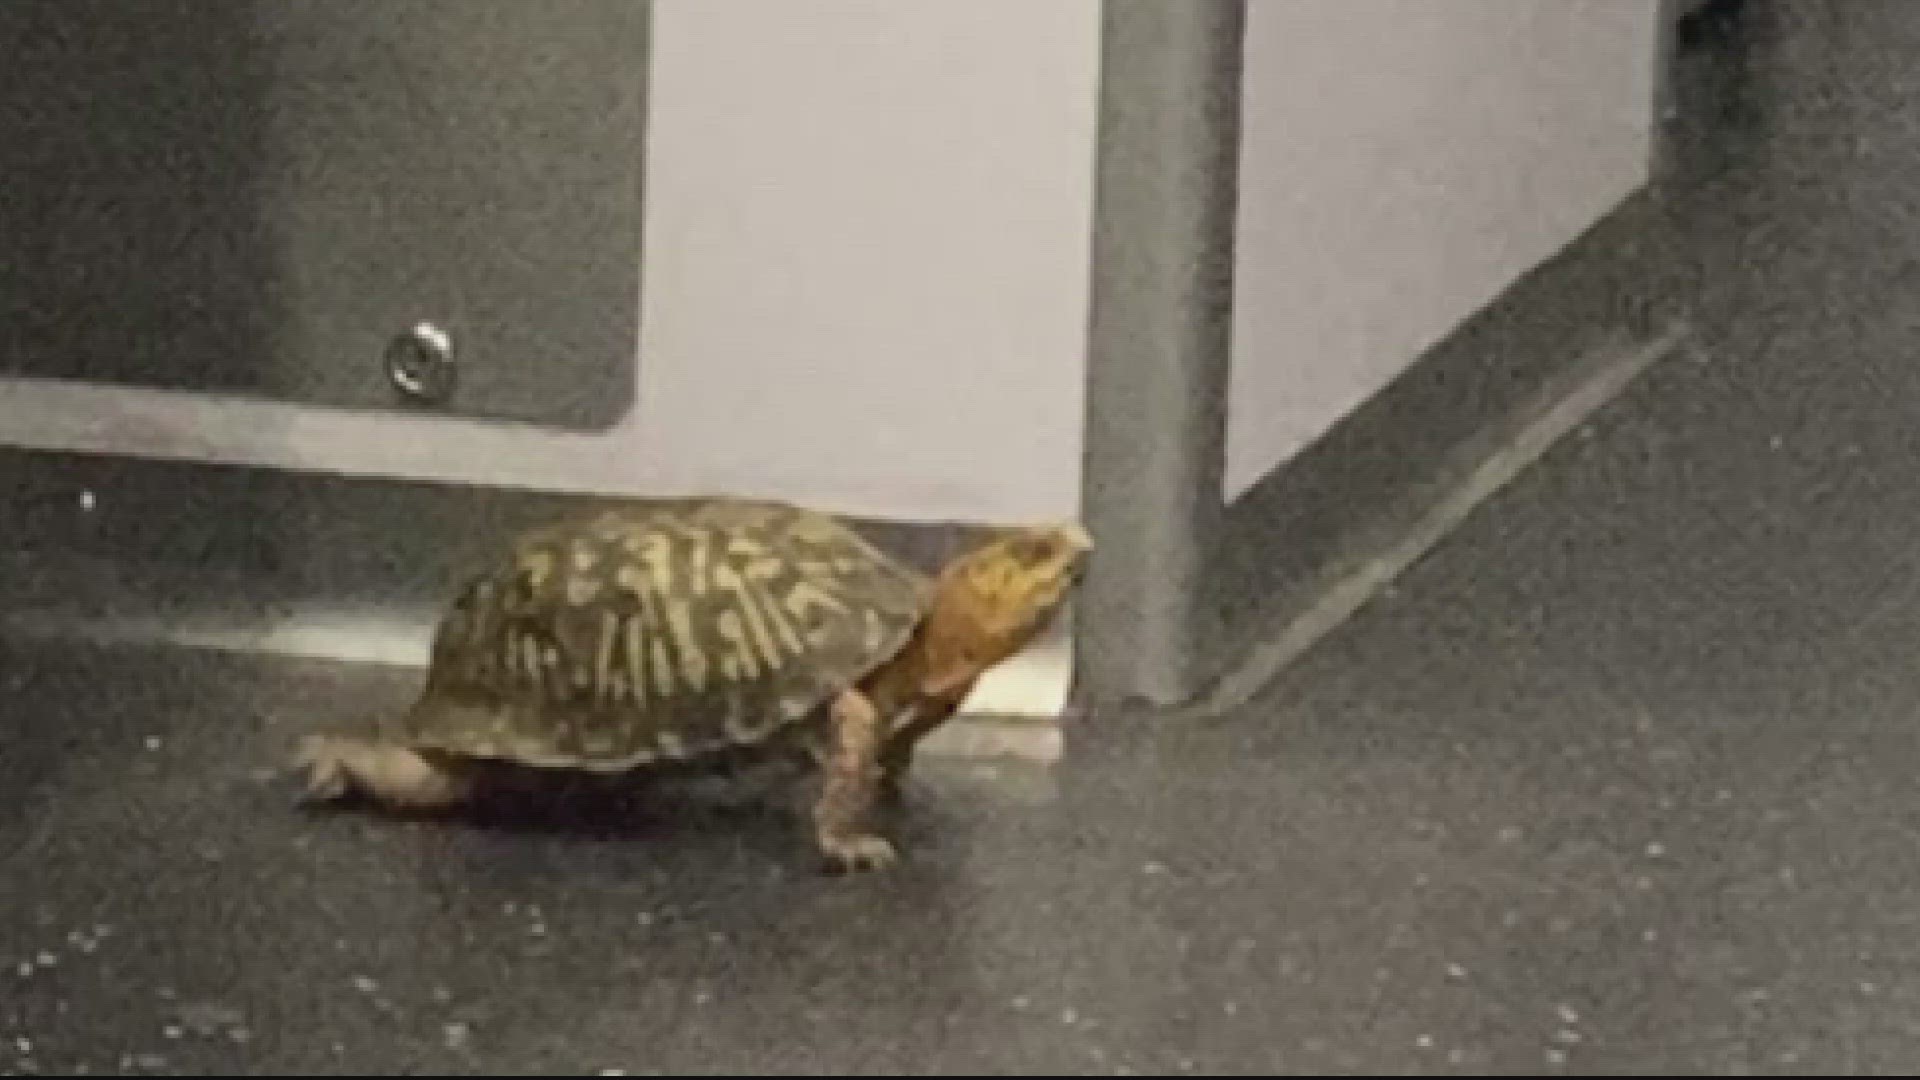 The turtle is now in the care of DC City Wildlife